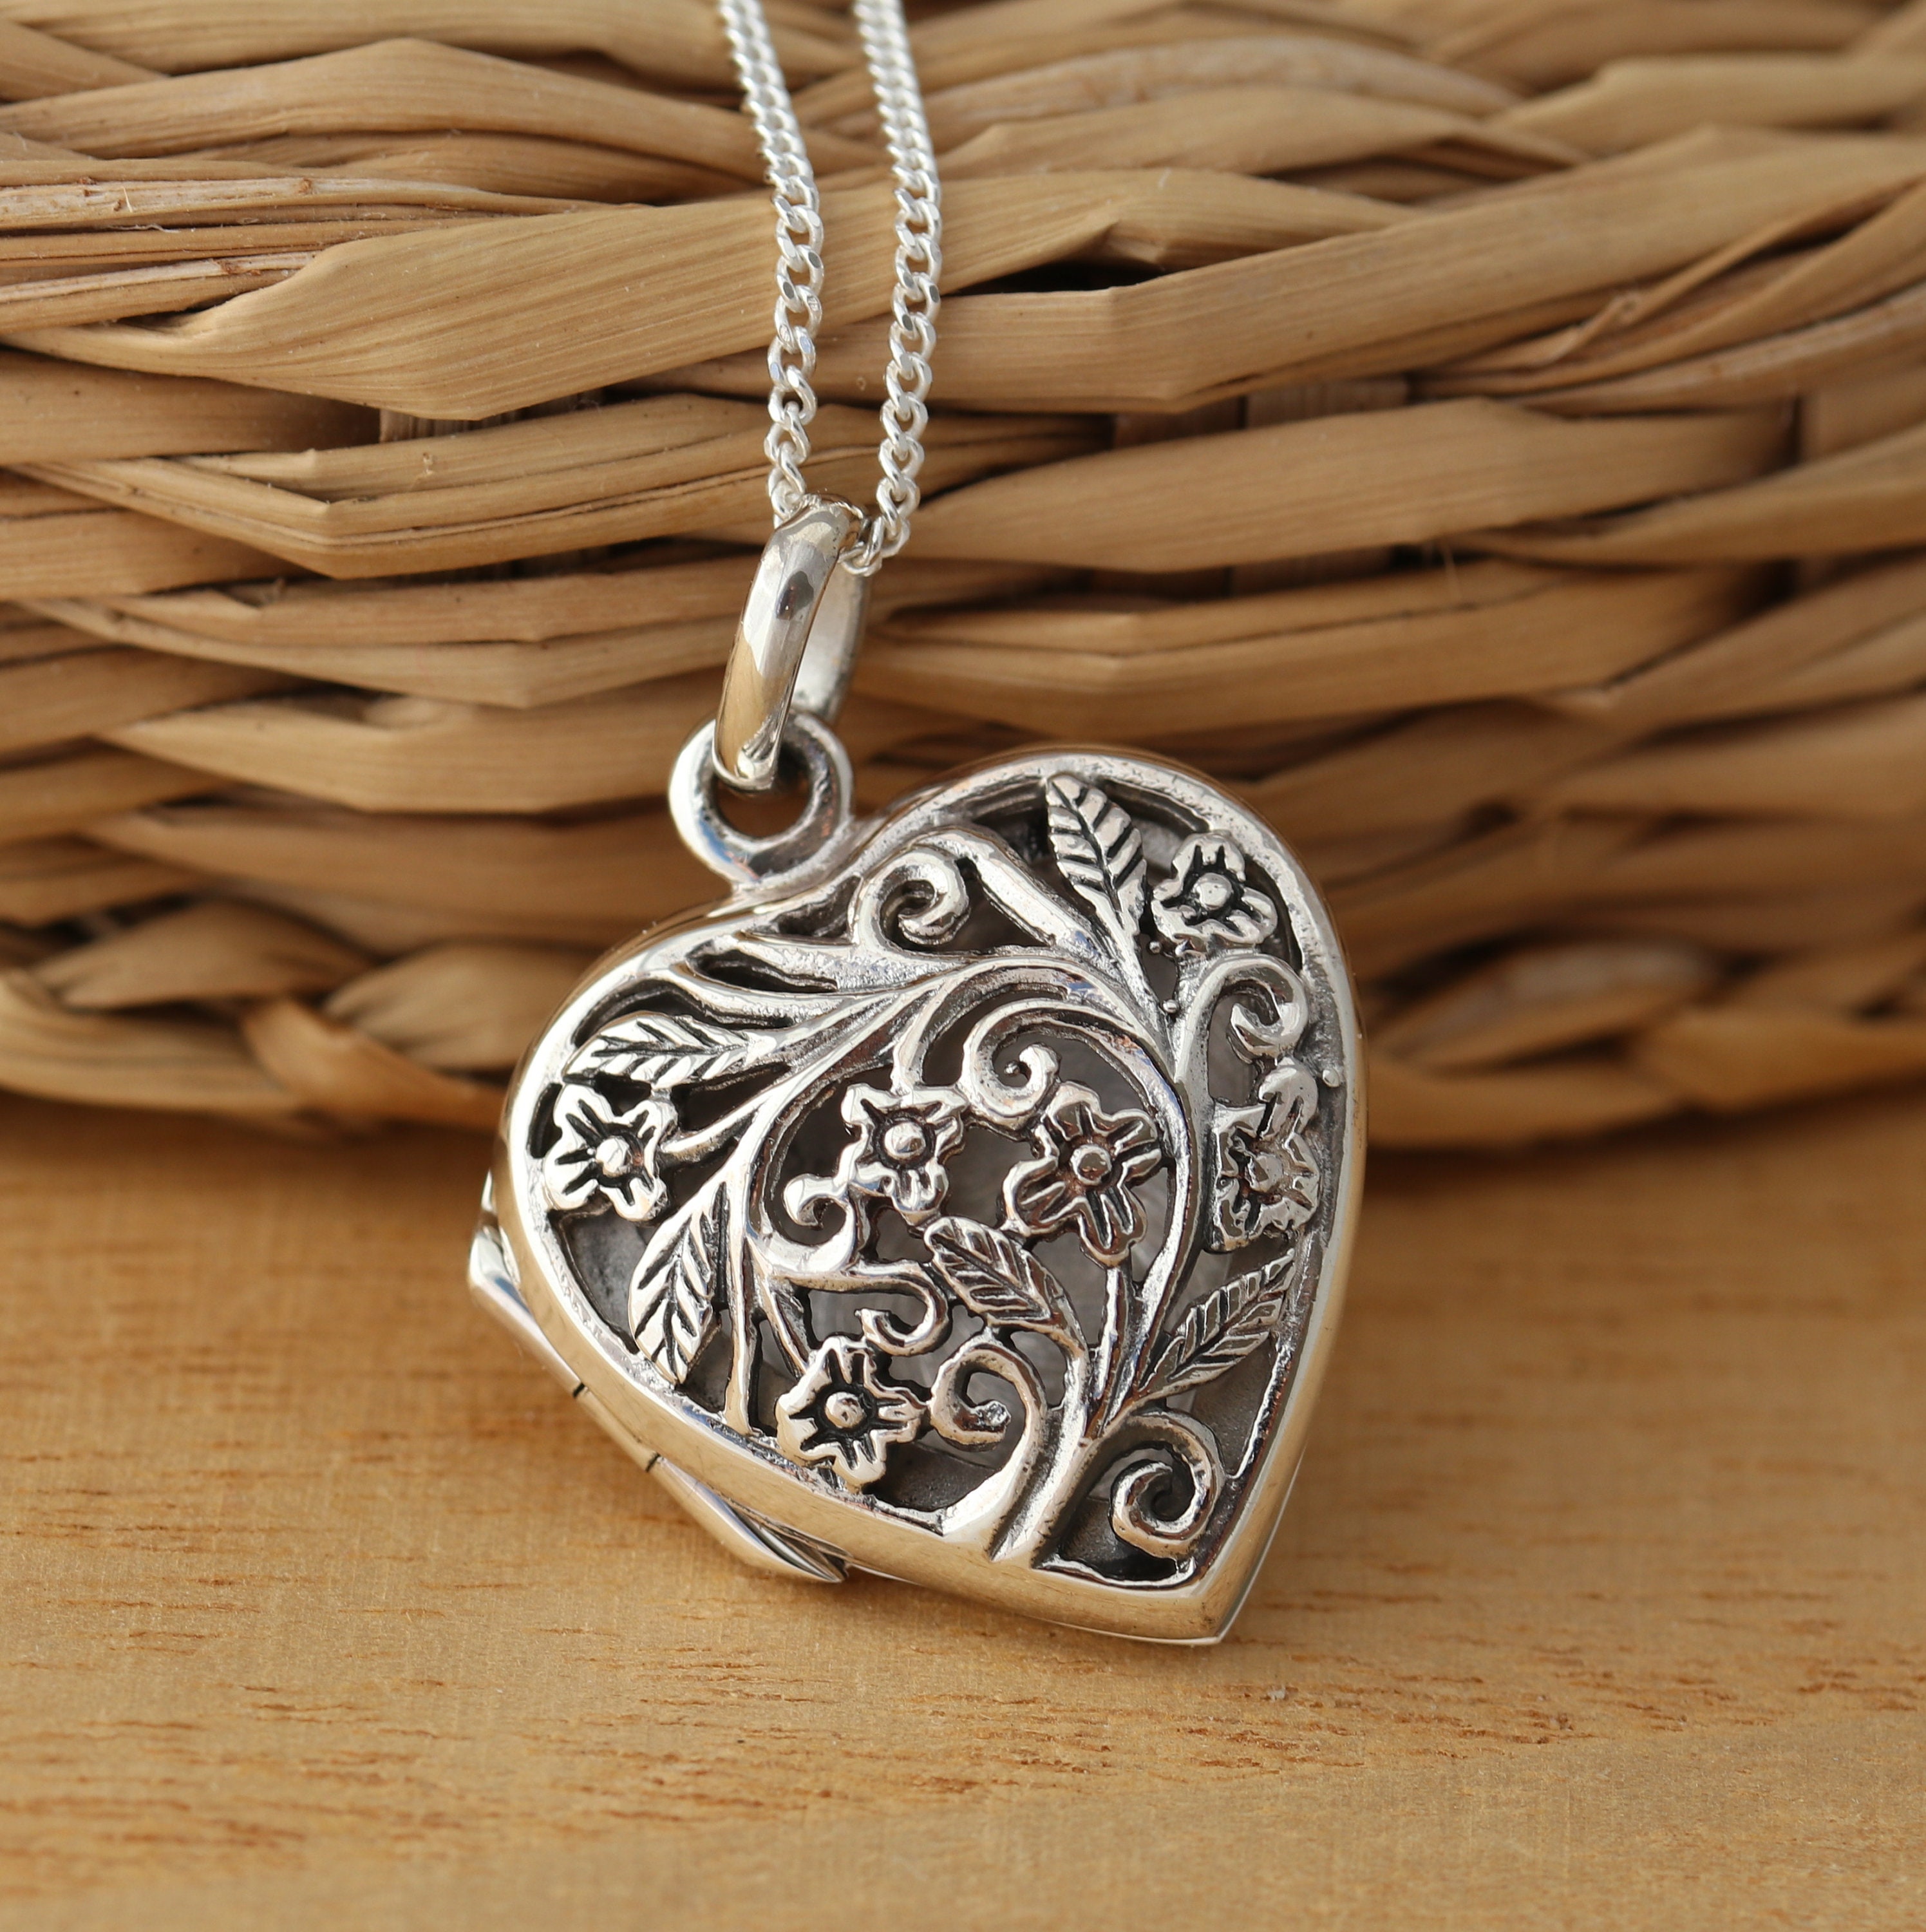 Sterling Silver Rhodium Heart Filigree Locket Pendant Necklace Chain Included